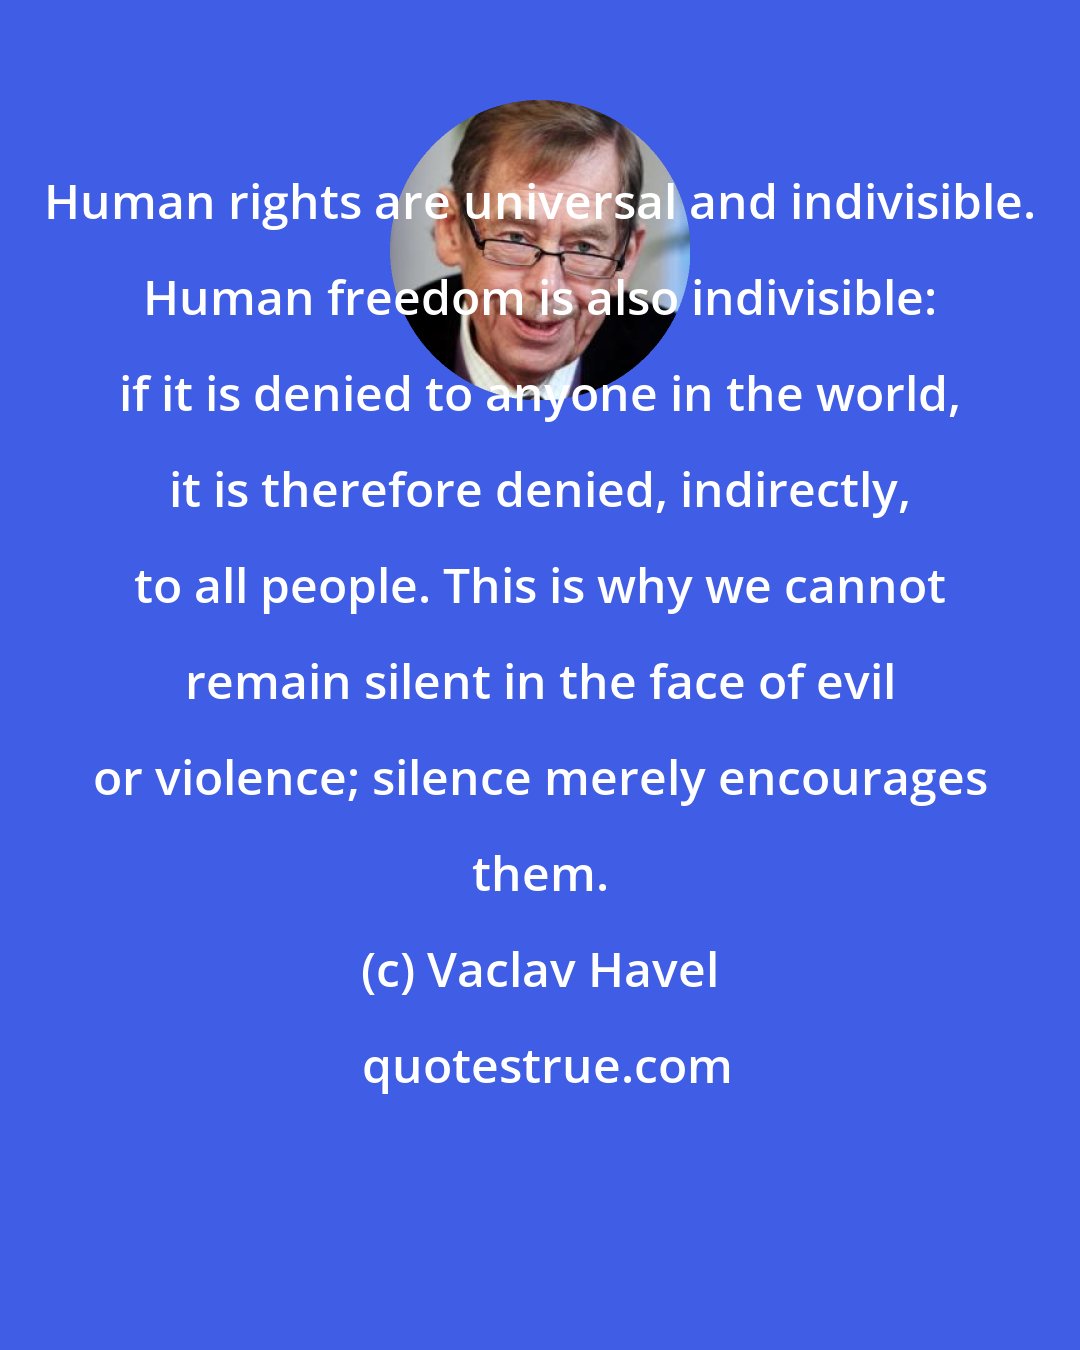 Vaclav Havel: Human rights are universal and indivisible. Human freedom is also indivisible: if it is denied to anyone in the world, it is therefore denied, indirectly, to all people. This is why we cannot remain silent in the face of evil or violence; silence merely encourages them.